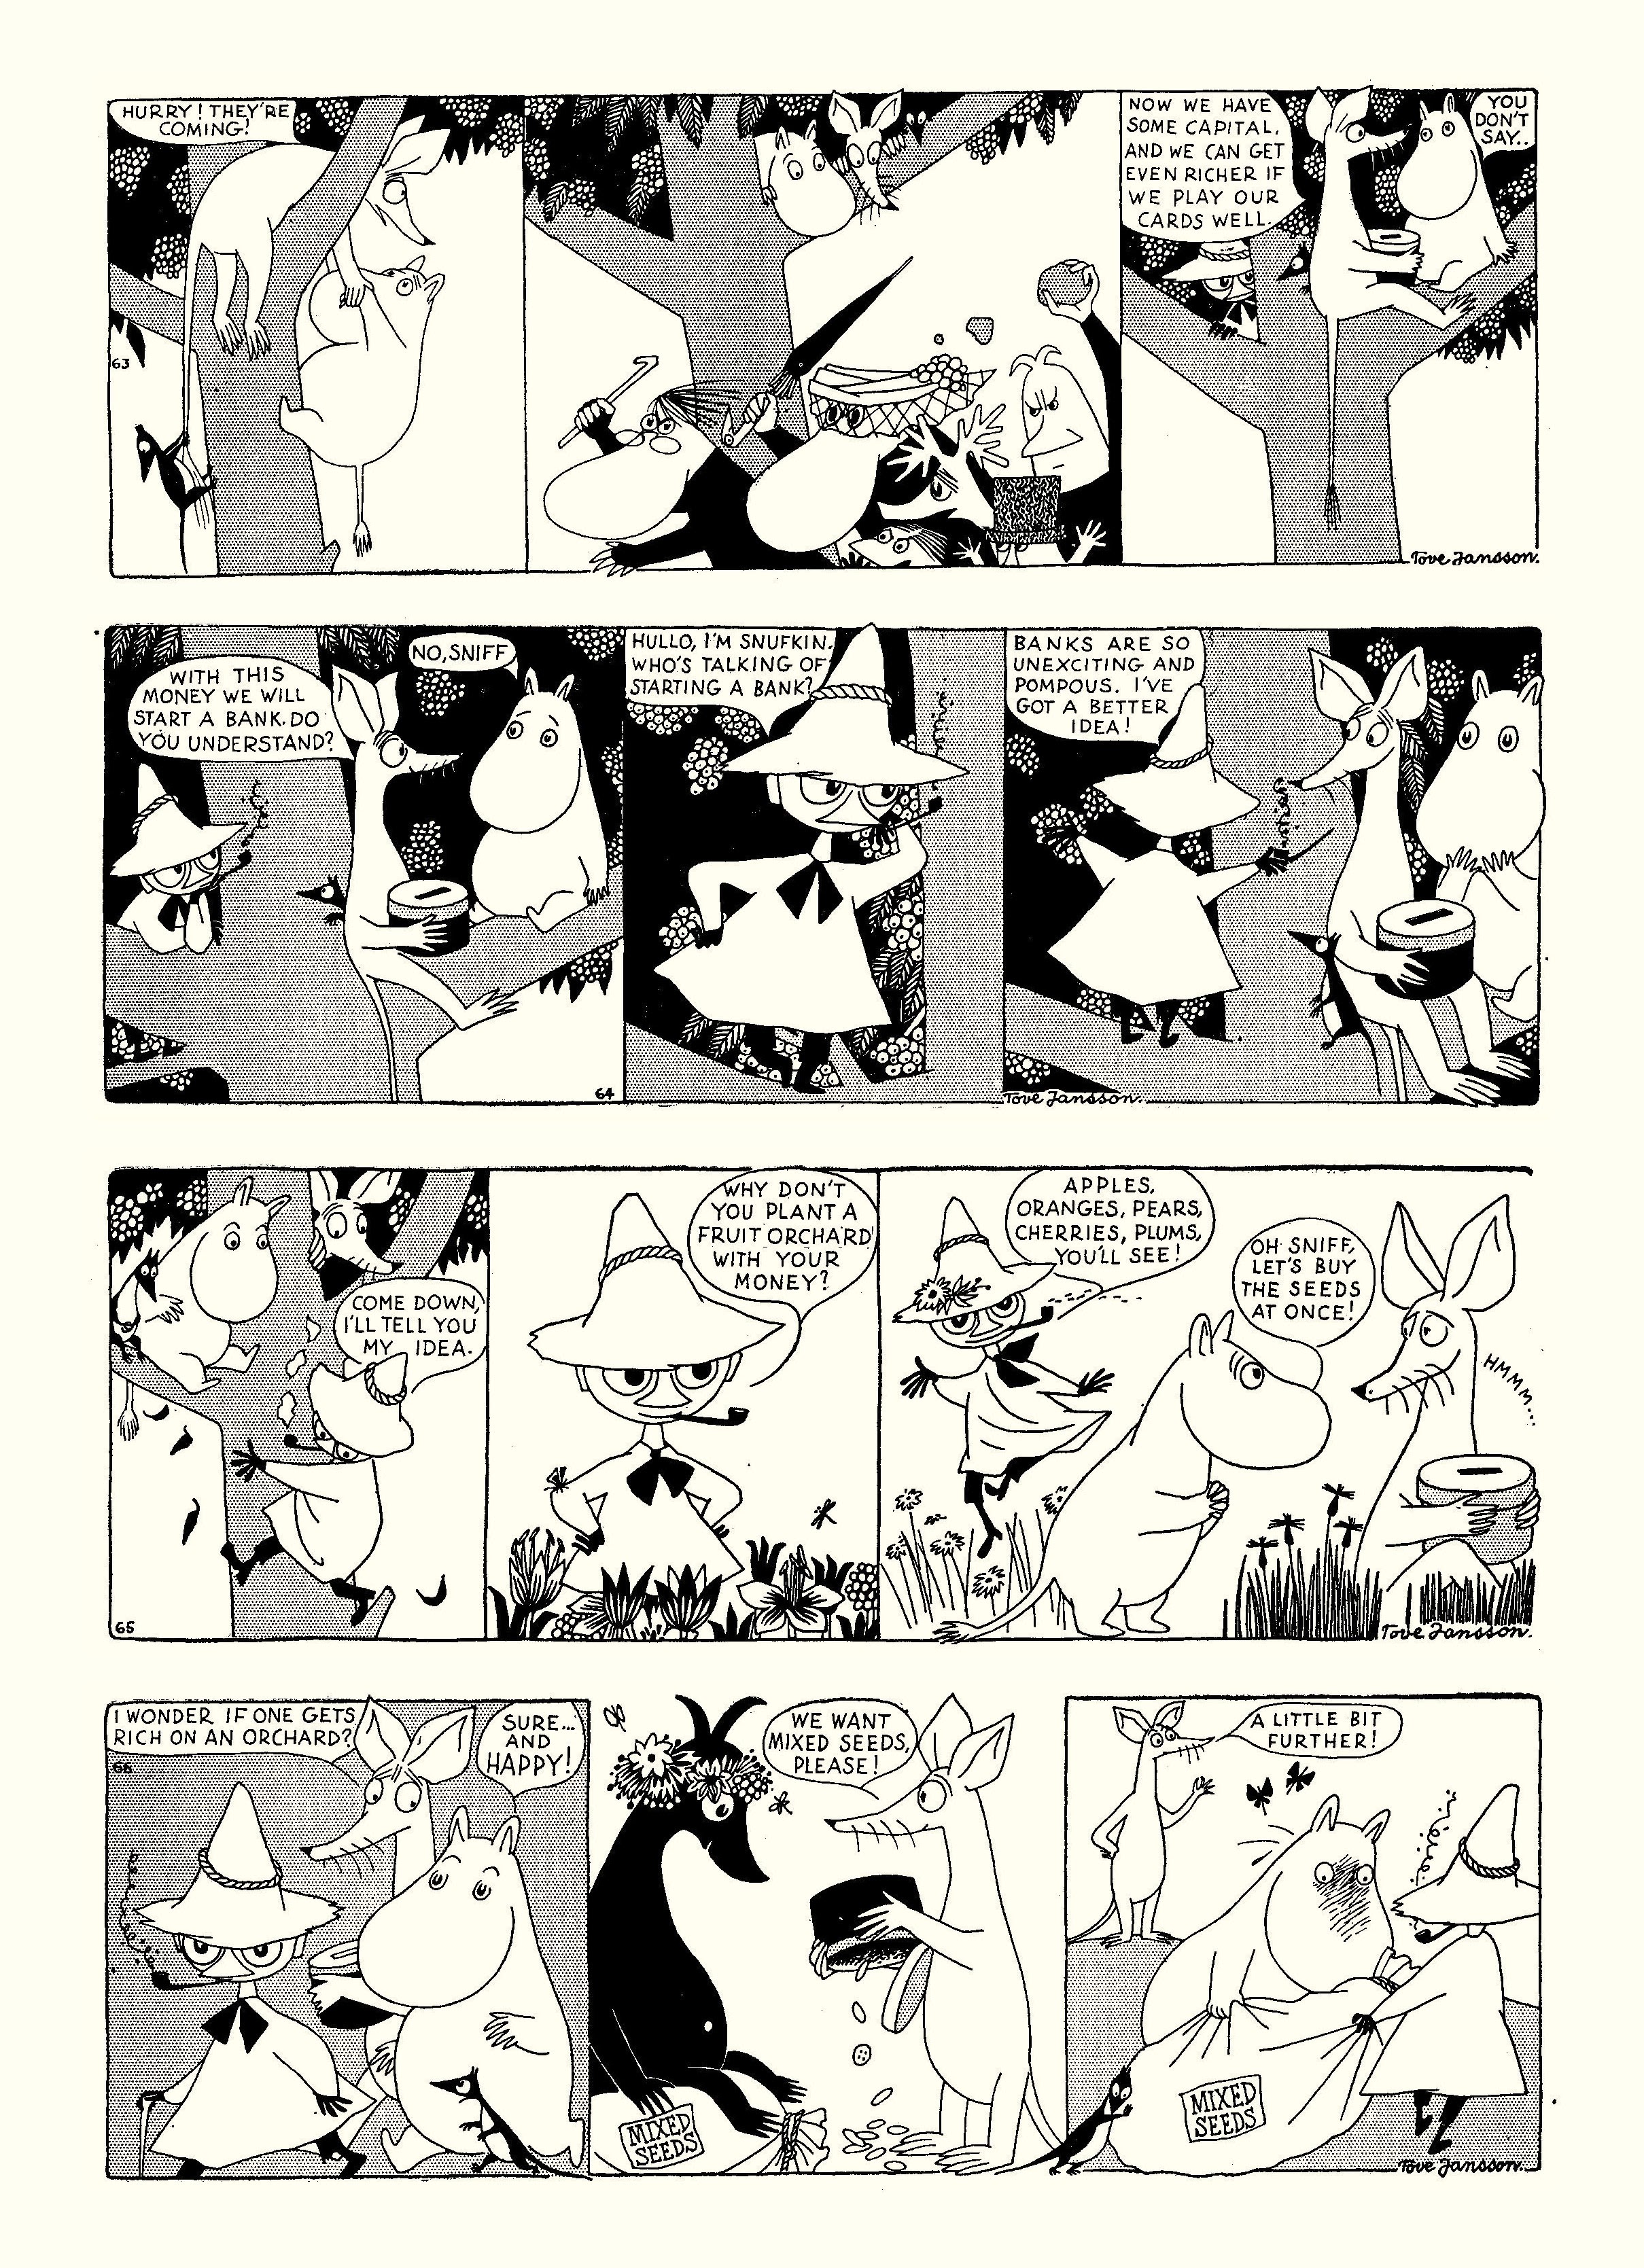 Read online Moomin: The Complete Tove Jansson Comic Strip comic -  Issue # TPB 1 - 22